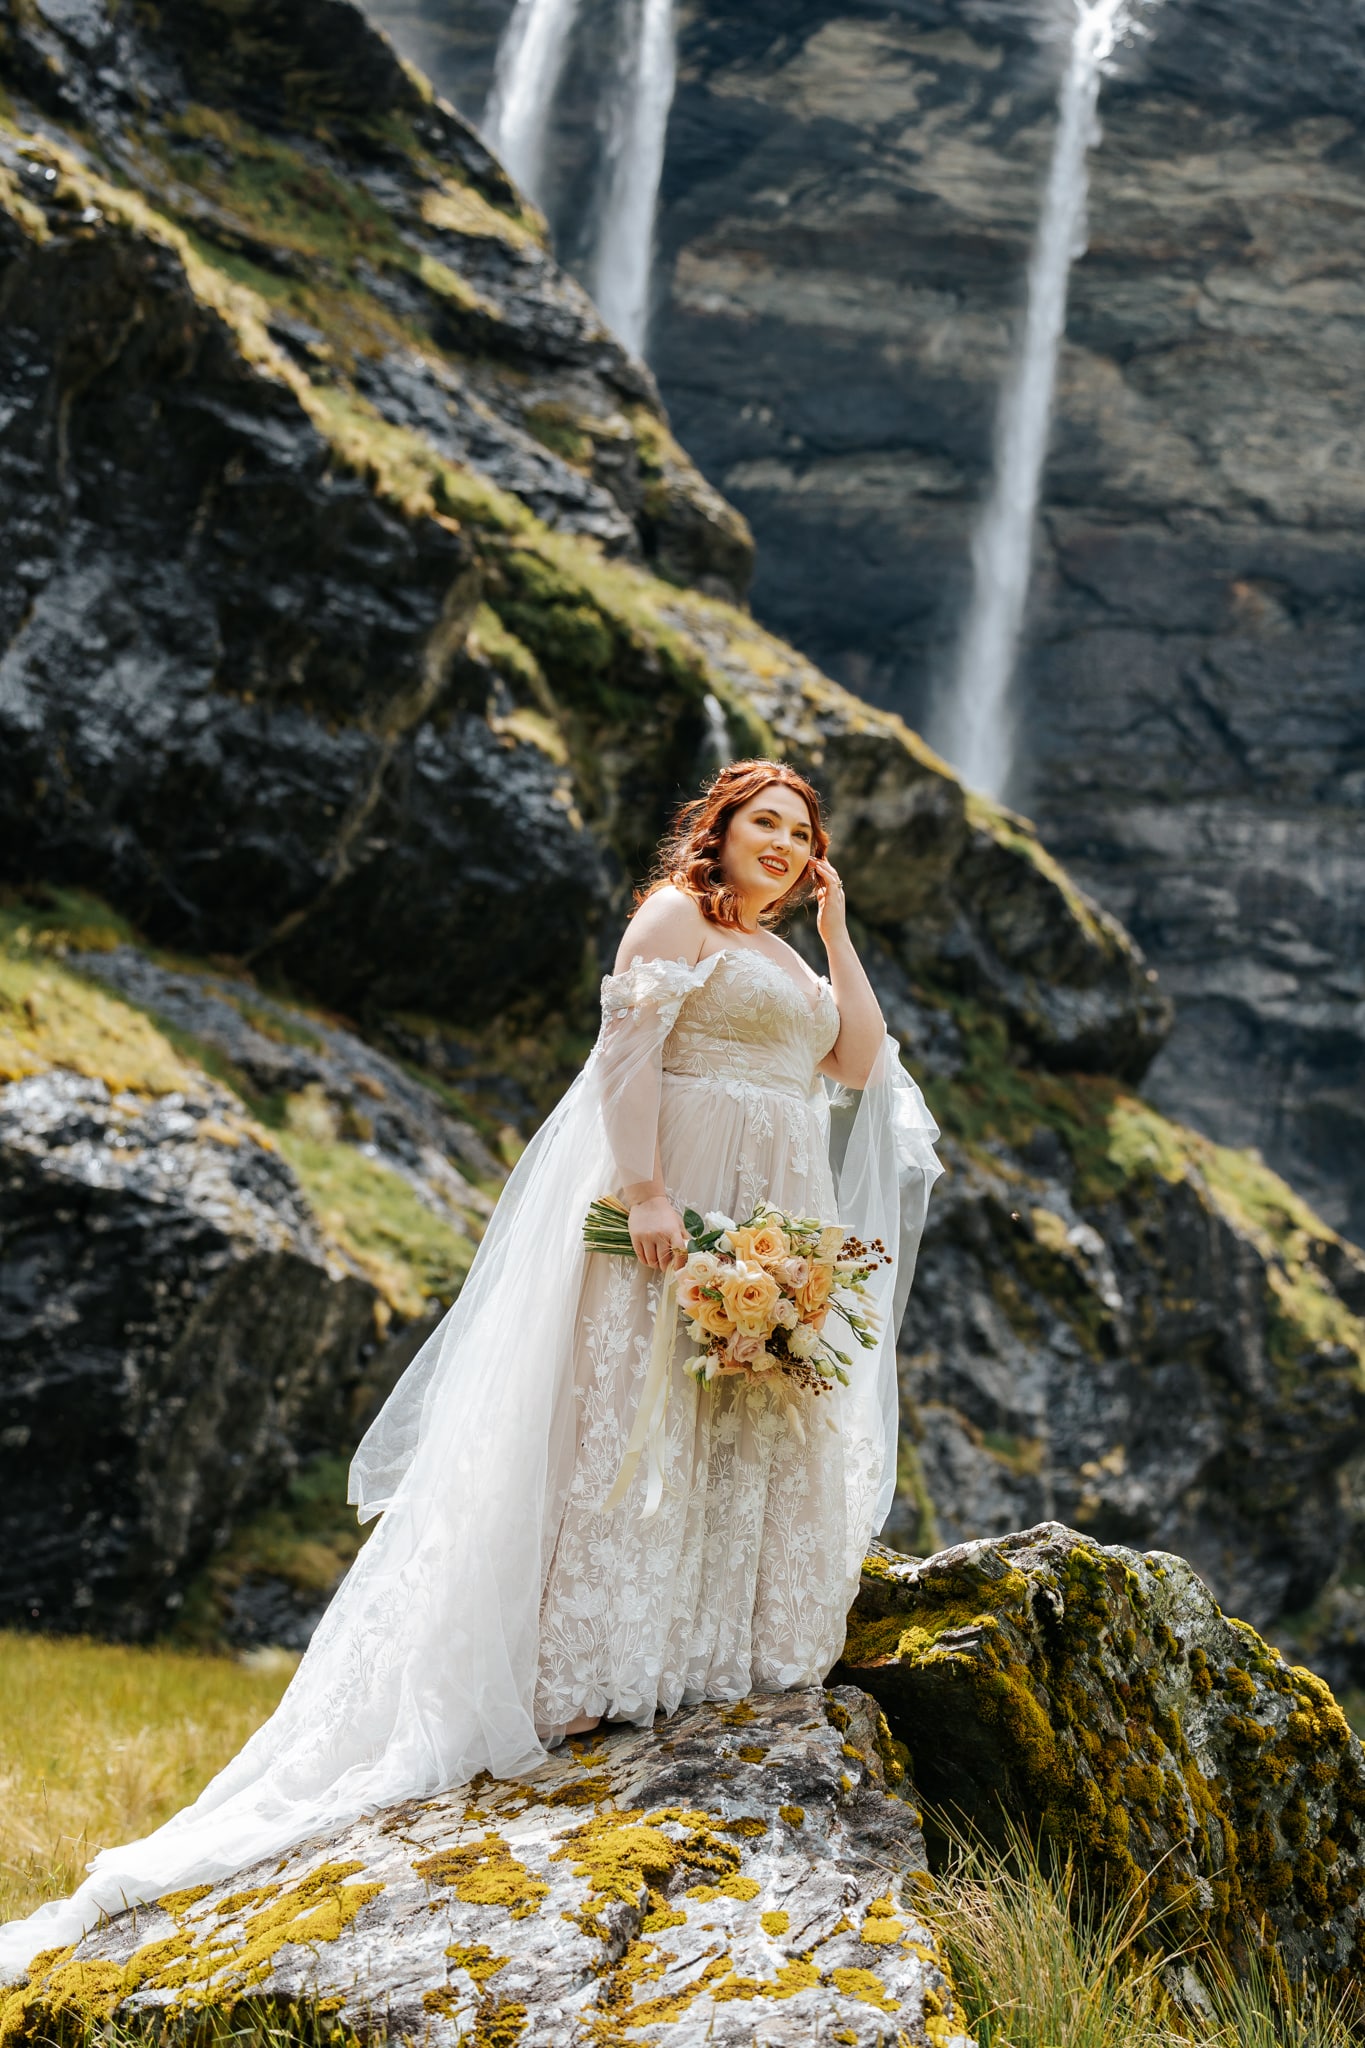 Adventure Wedding in Queenstown with a heli wedding ceremony at Earnslaw Burn